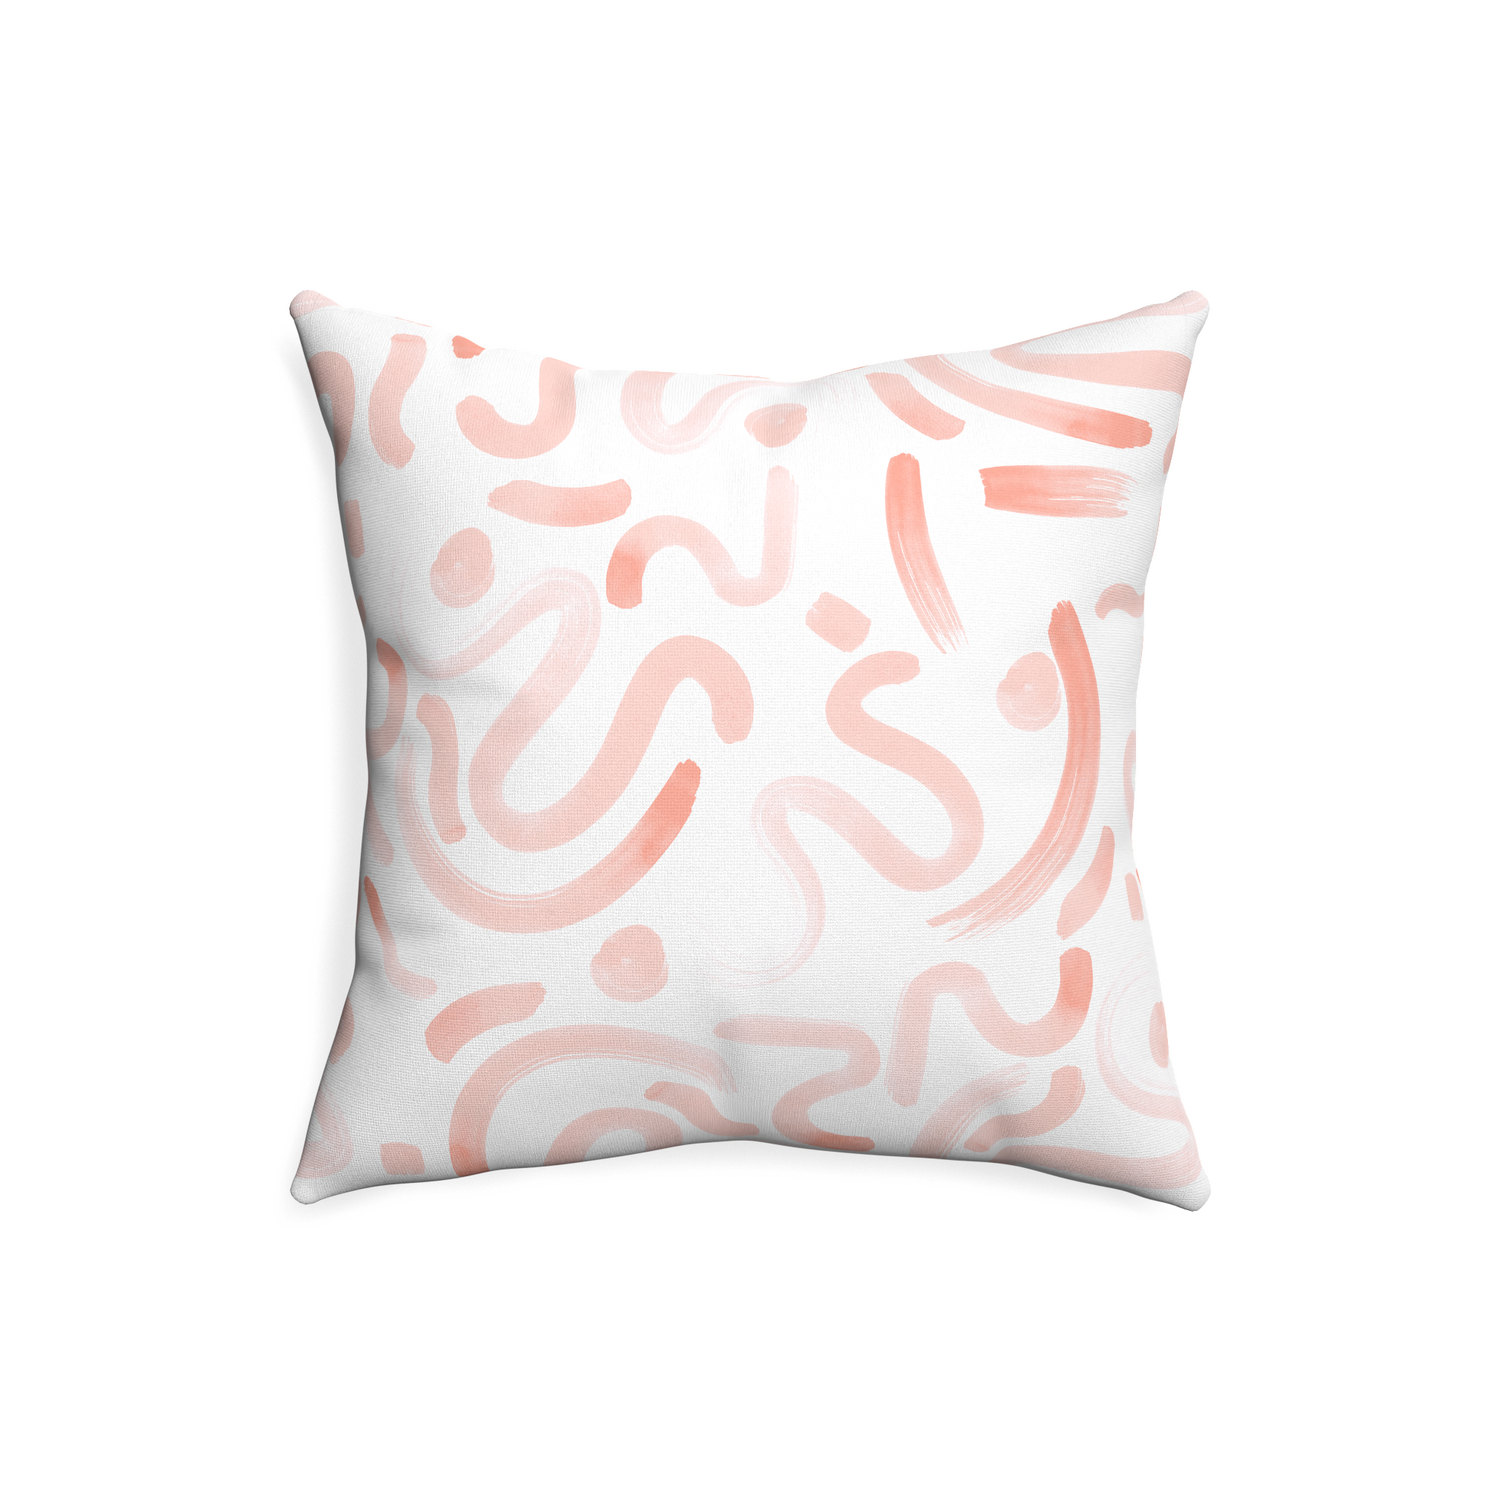 20-square hockney pink custom pink graphicpillow with none on white background